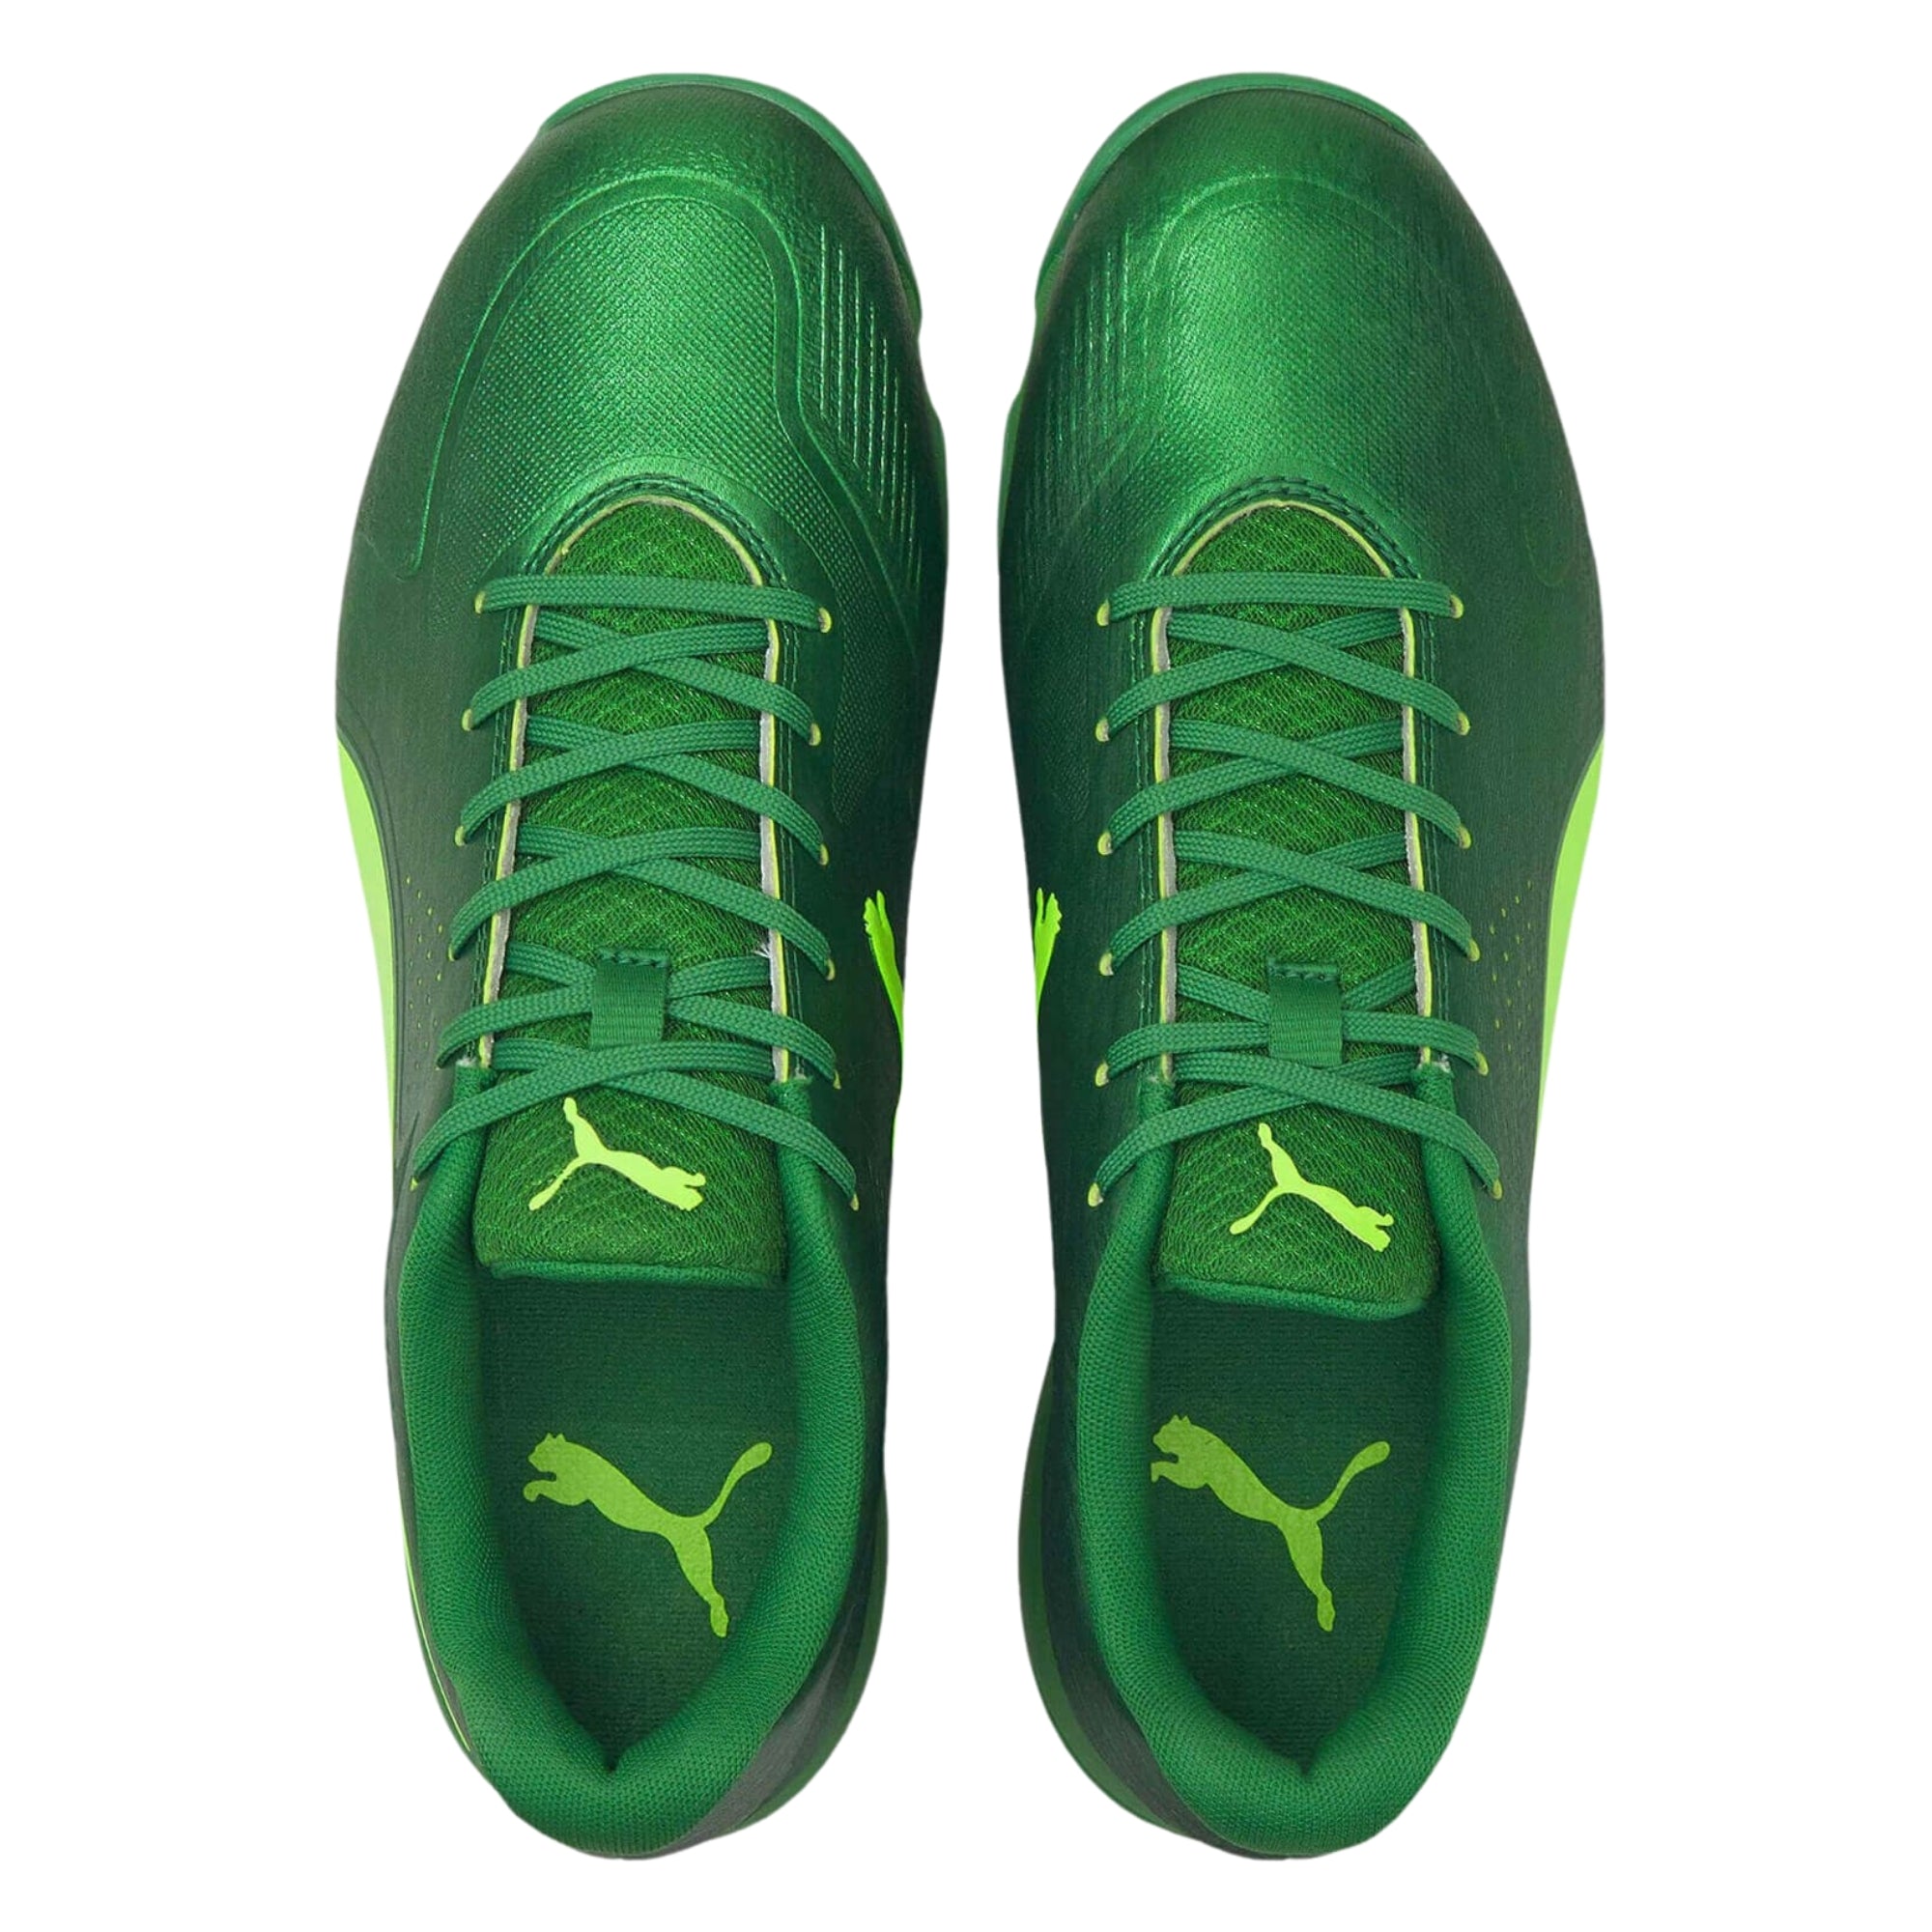 Puma Cricket Shoes One 8, Green